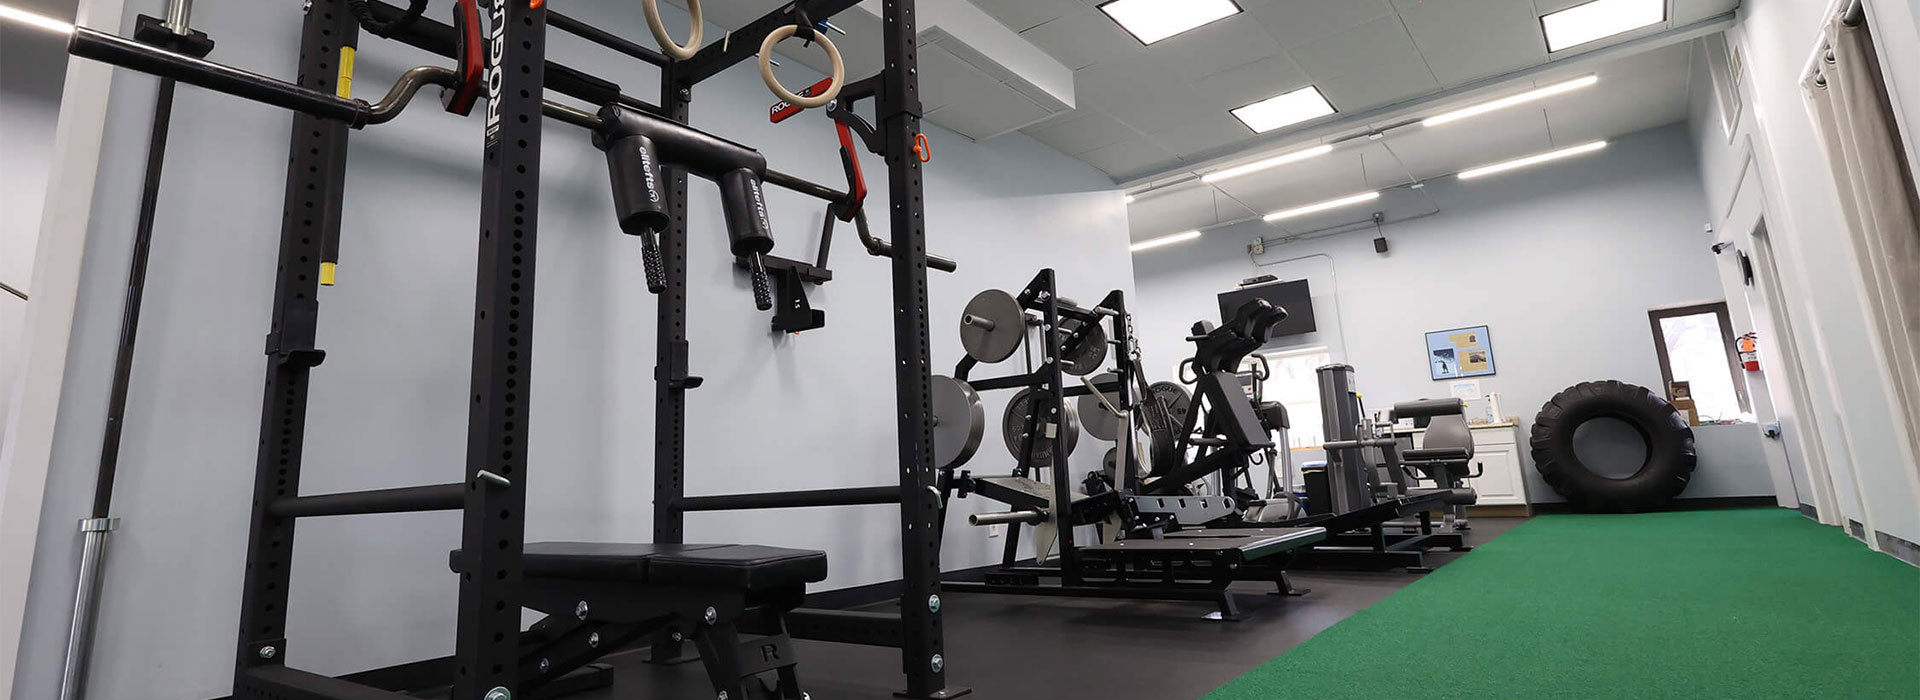 A Gym Near Pleasantville That Can Help With Weight Loss and Dieting